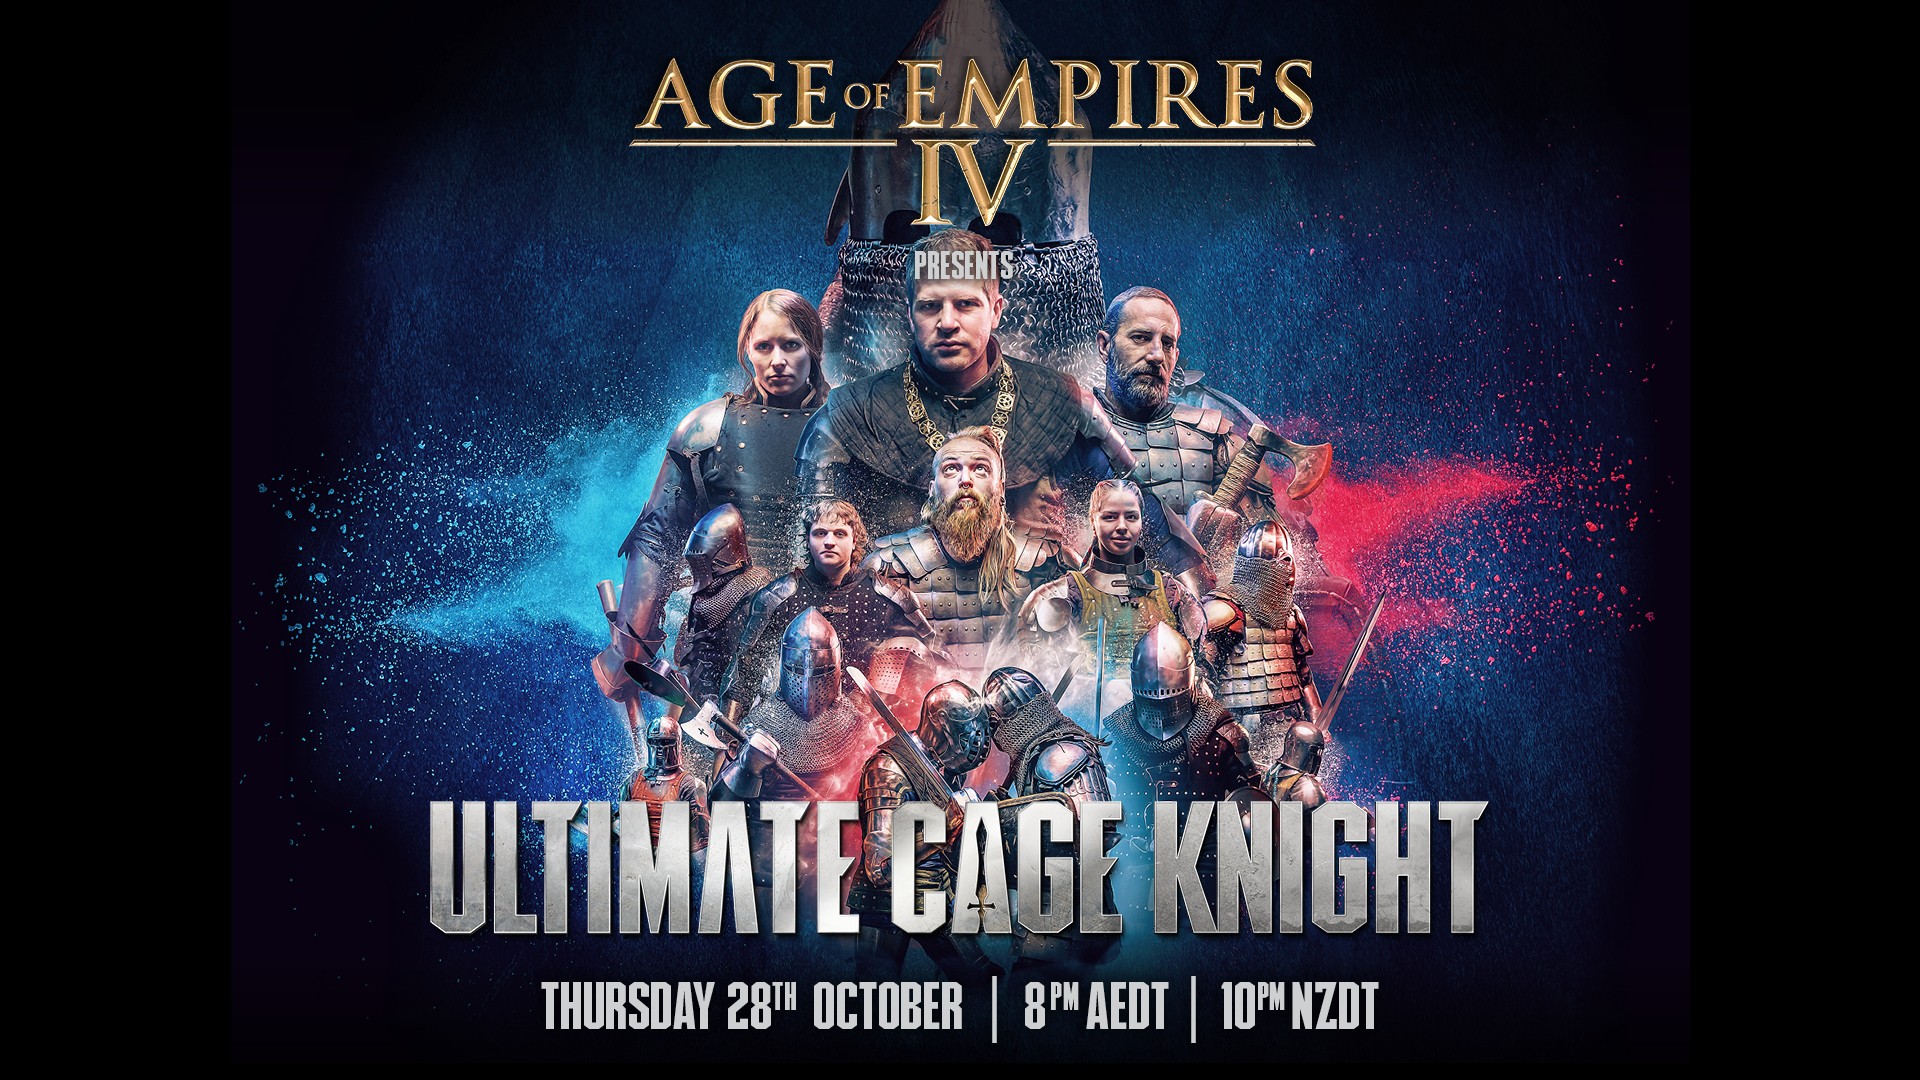 Xbox ANZ Catapults Age of Empires IV Into The Real World With Knights Going Head-To-Head In Medieval Battle